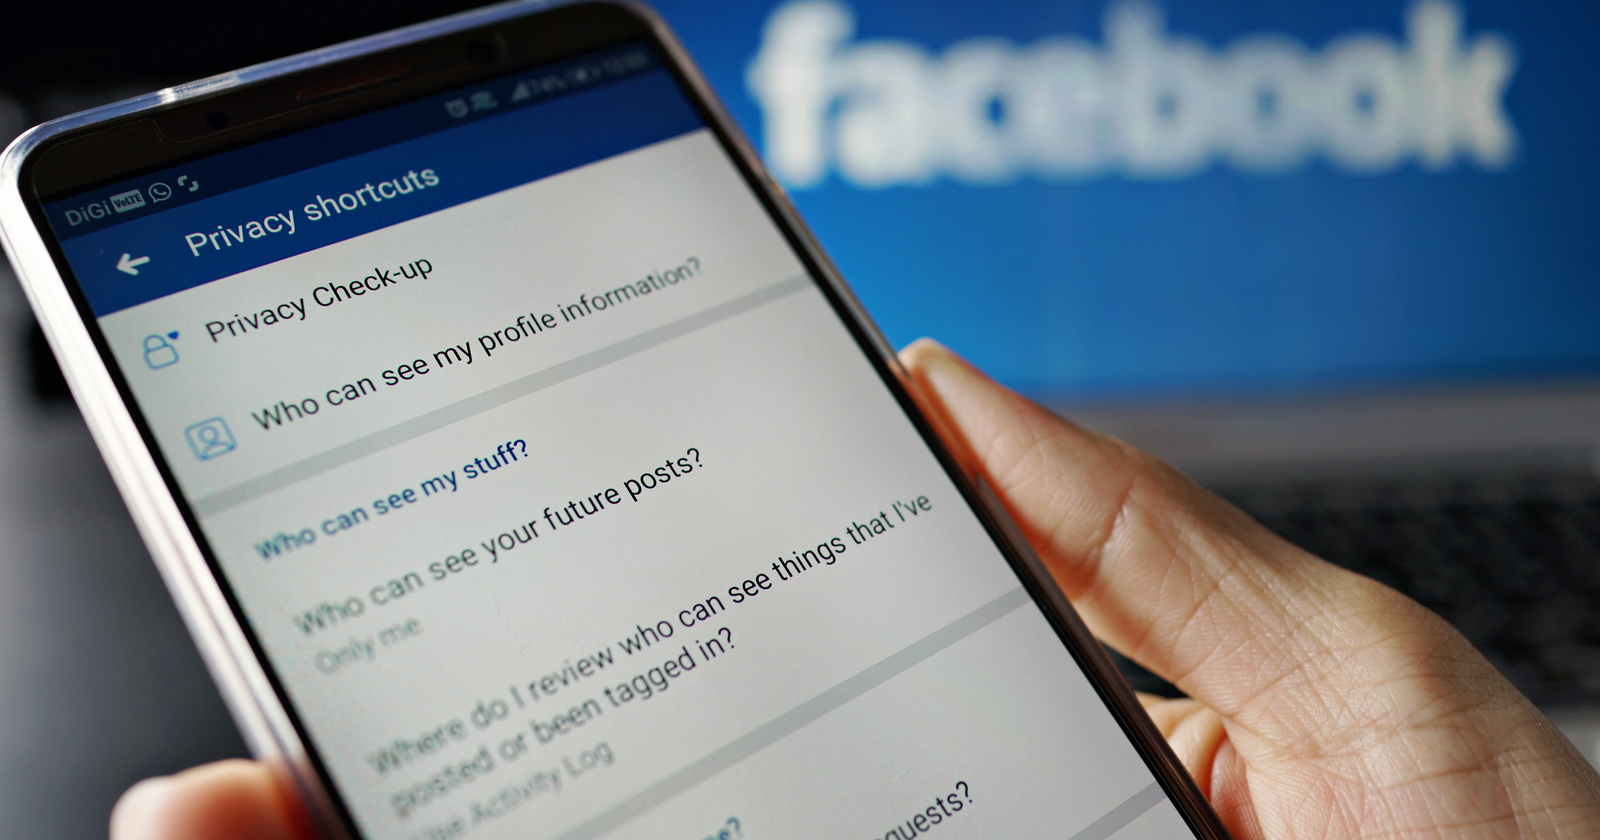 Facebook's One Click Login Tool Goes Against Best Security